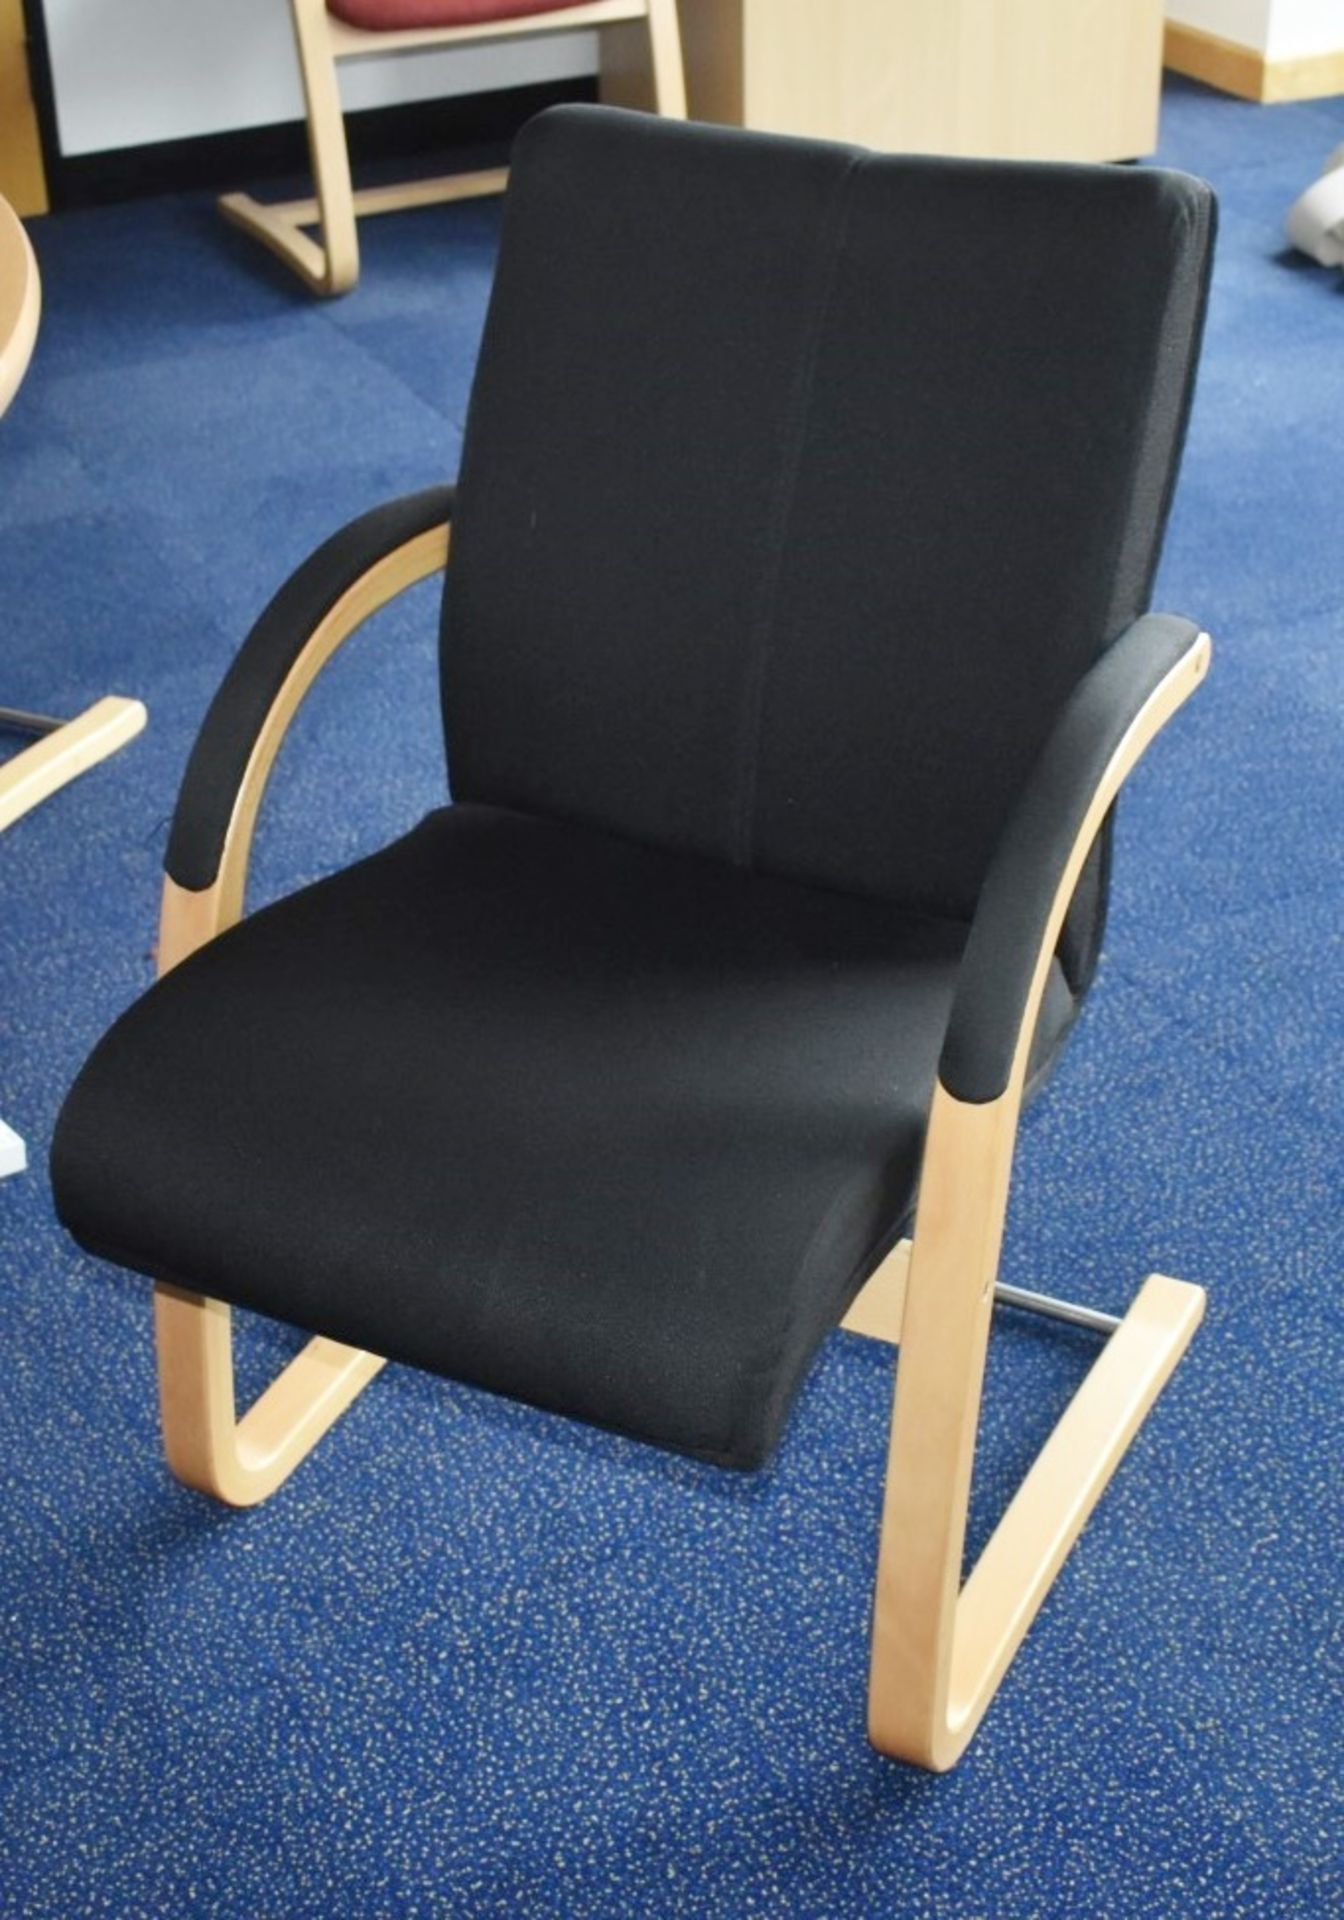 4 x Cantilever Office Meeting Chairs With Bentwood Frames and Black Fabric Seats -Â Manufactured - Image 2 of 7